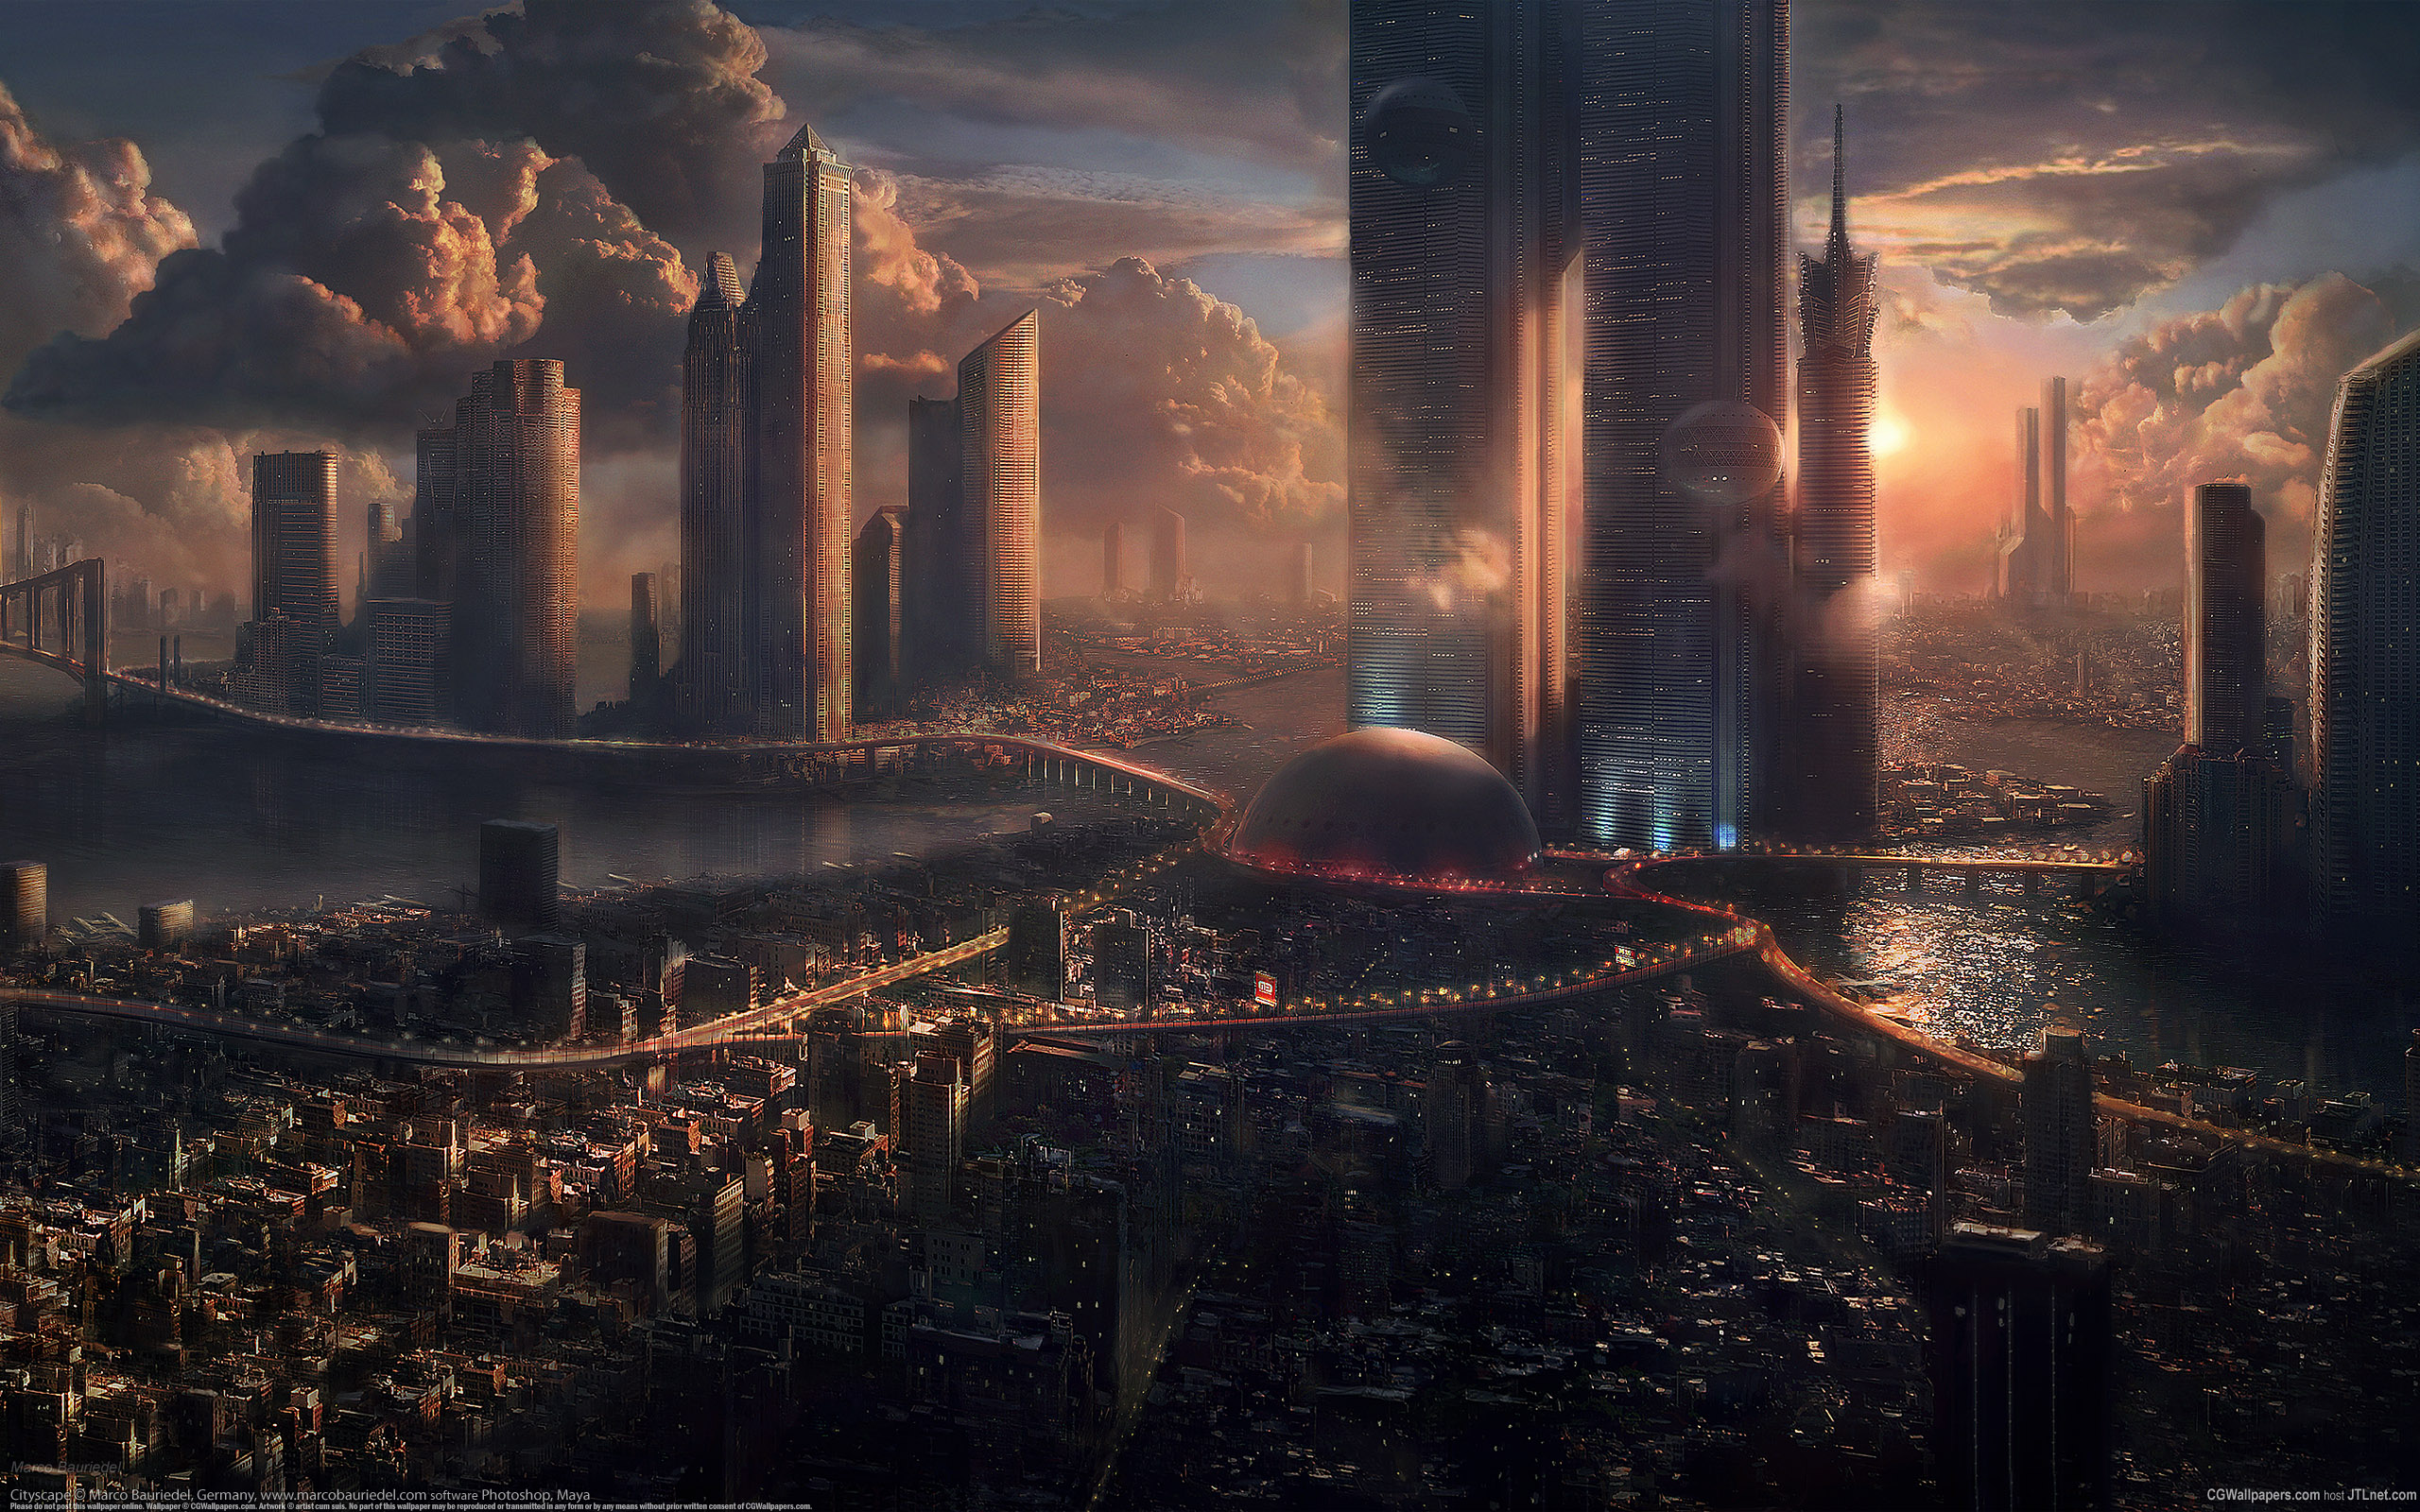 Desktop Sci Fi City On Author Unknown Submitted By David B